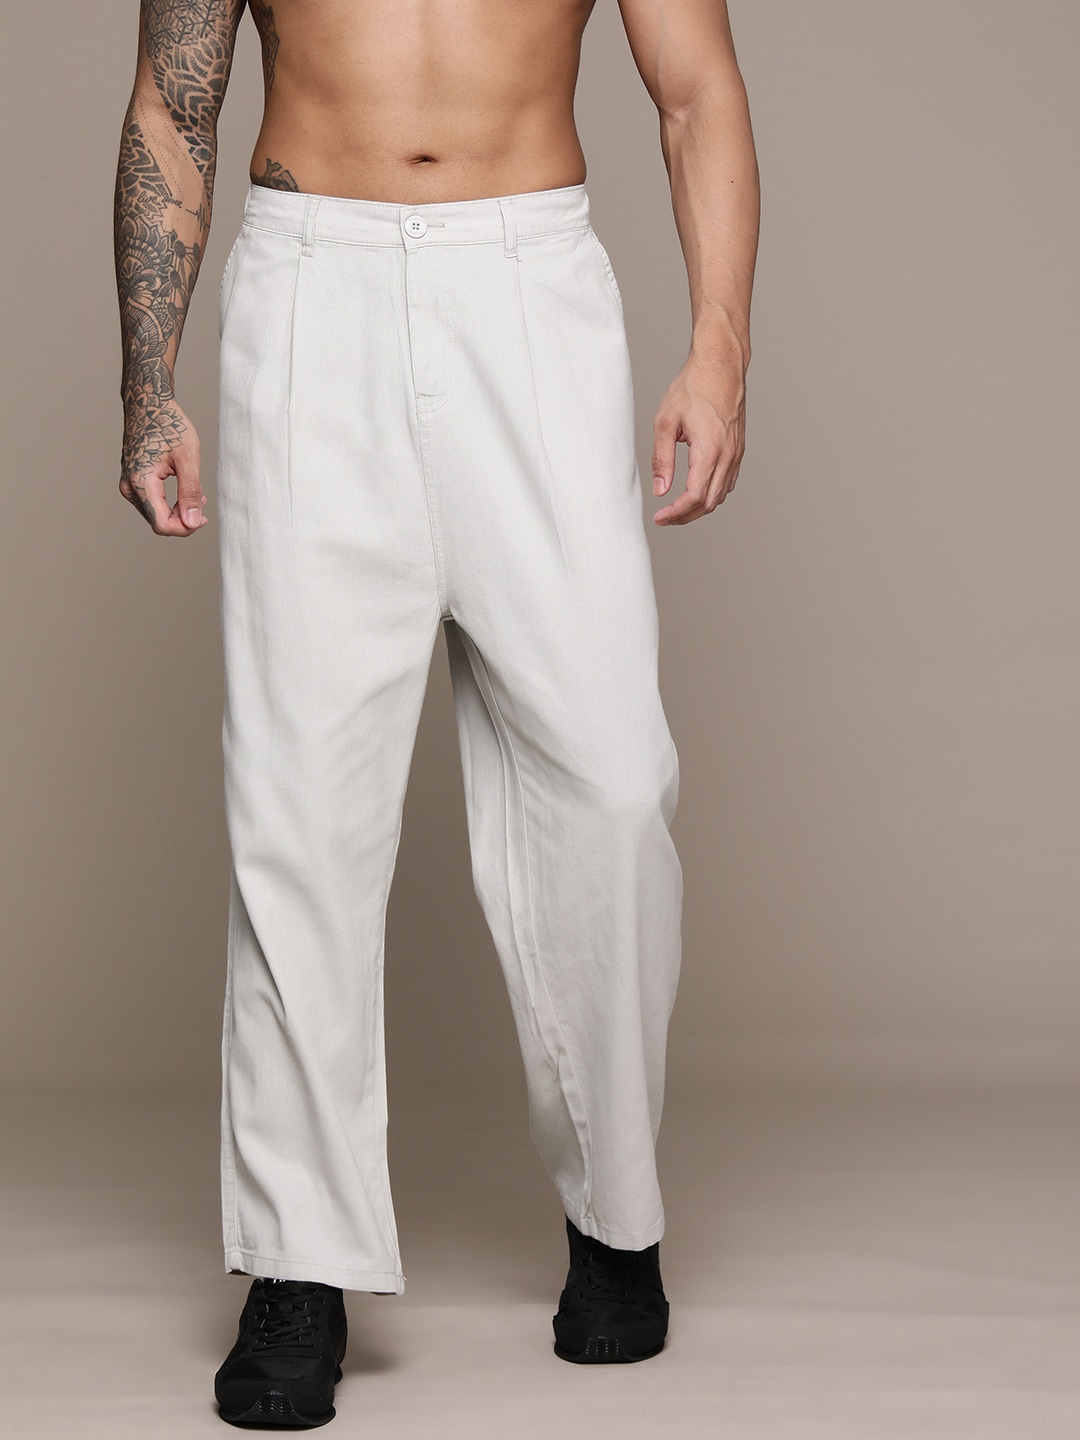 The Roadster Lifestyle Co. Men Pure Cotton Baggy Fit Low-Rise Trousers